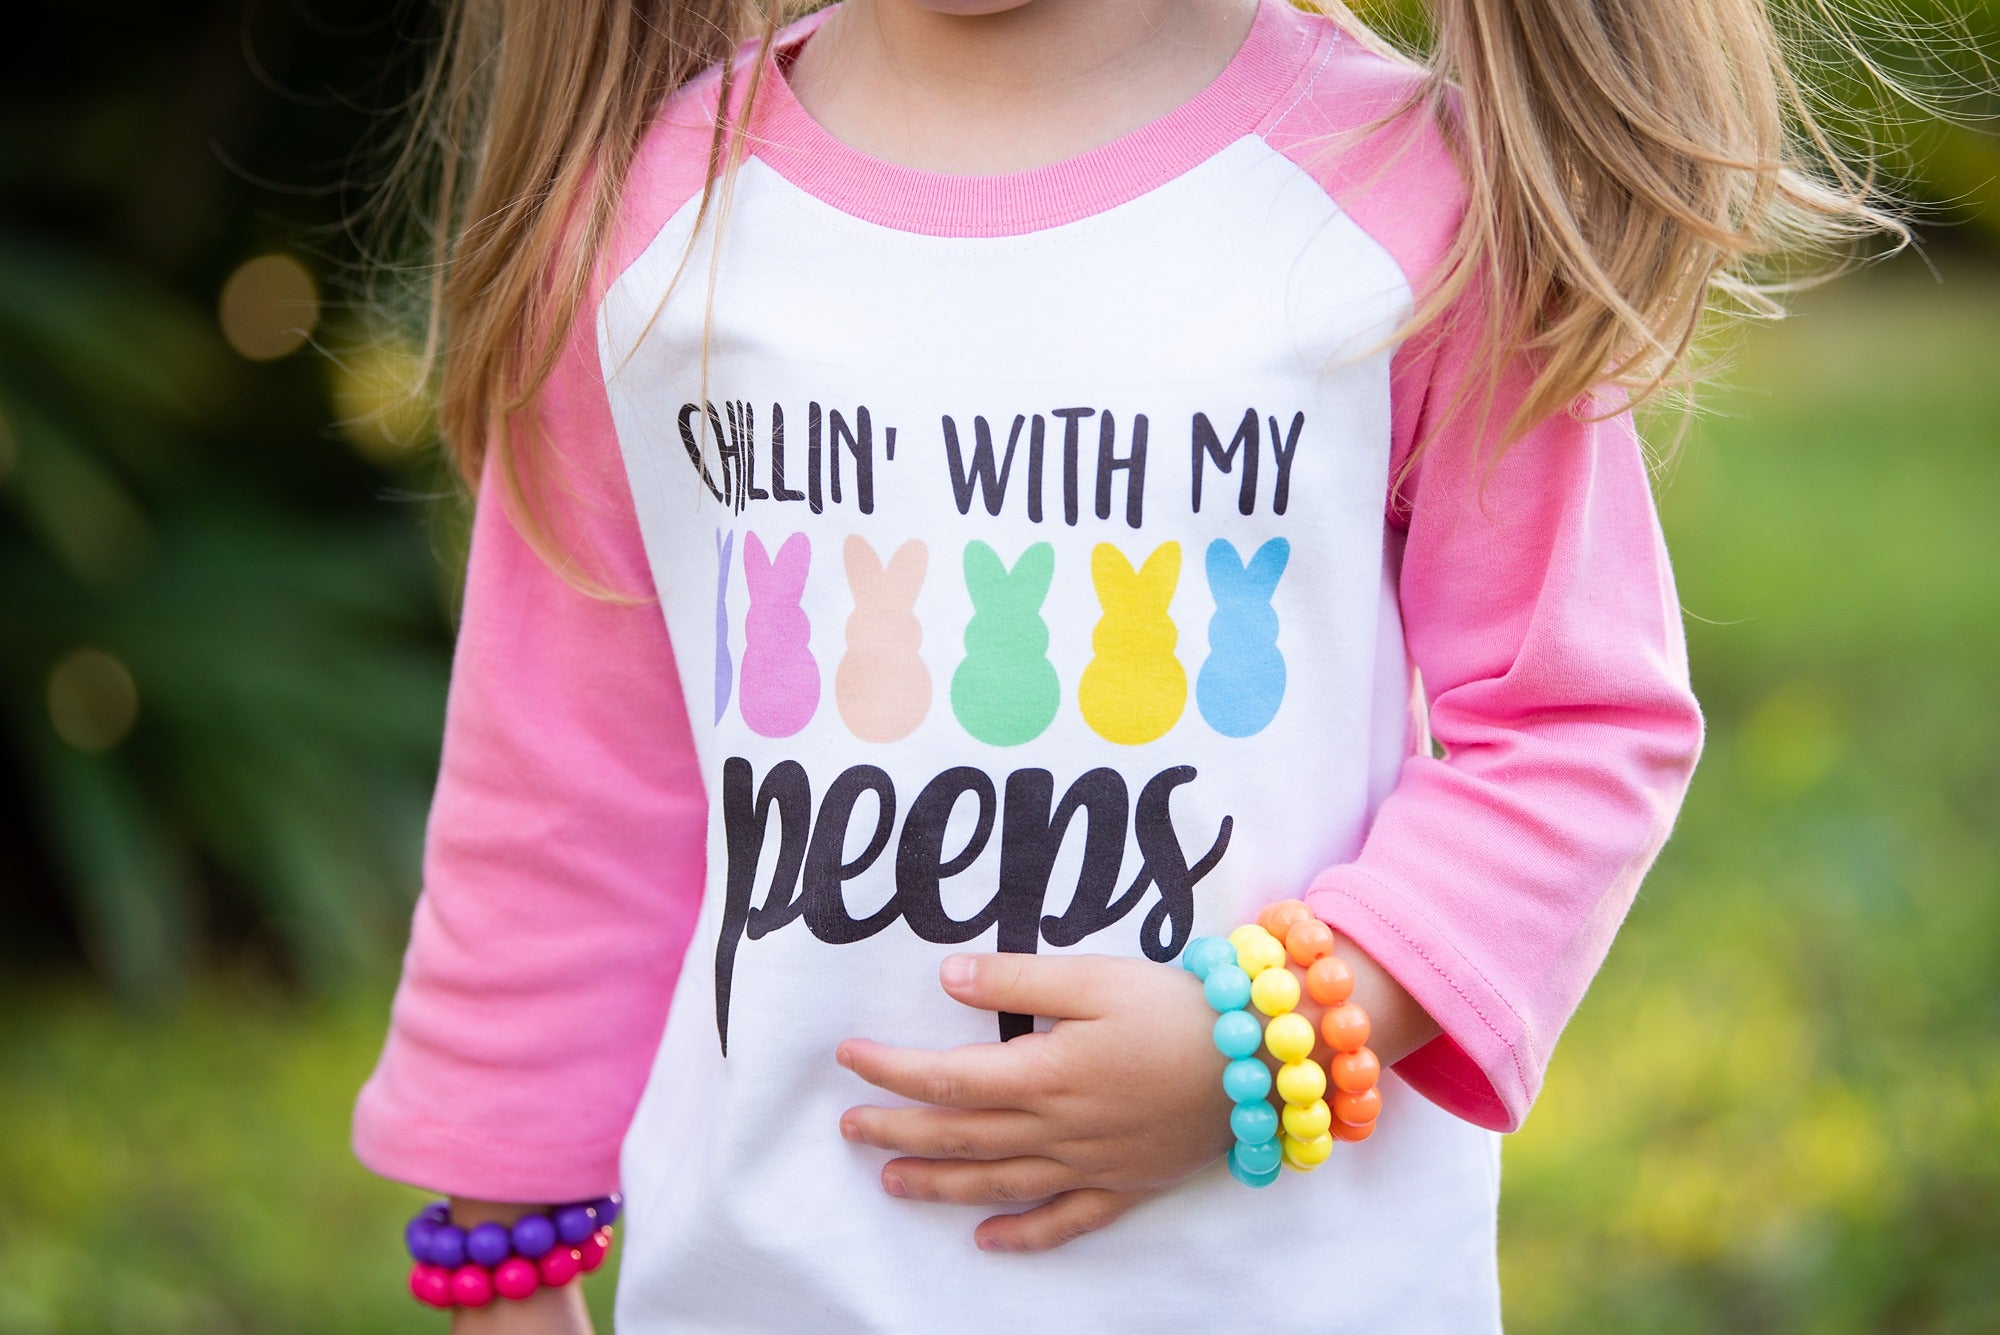 Chillin' with my peeps - Graphic Tee